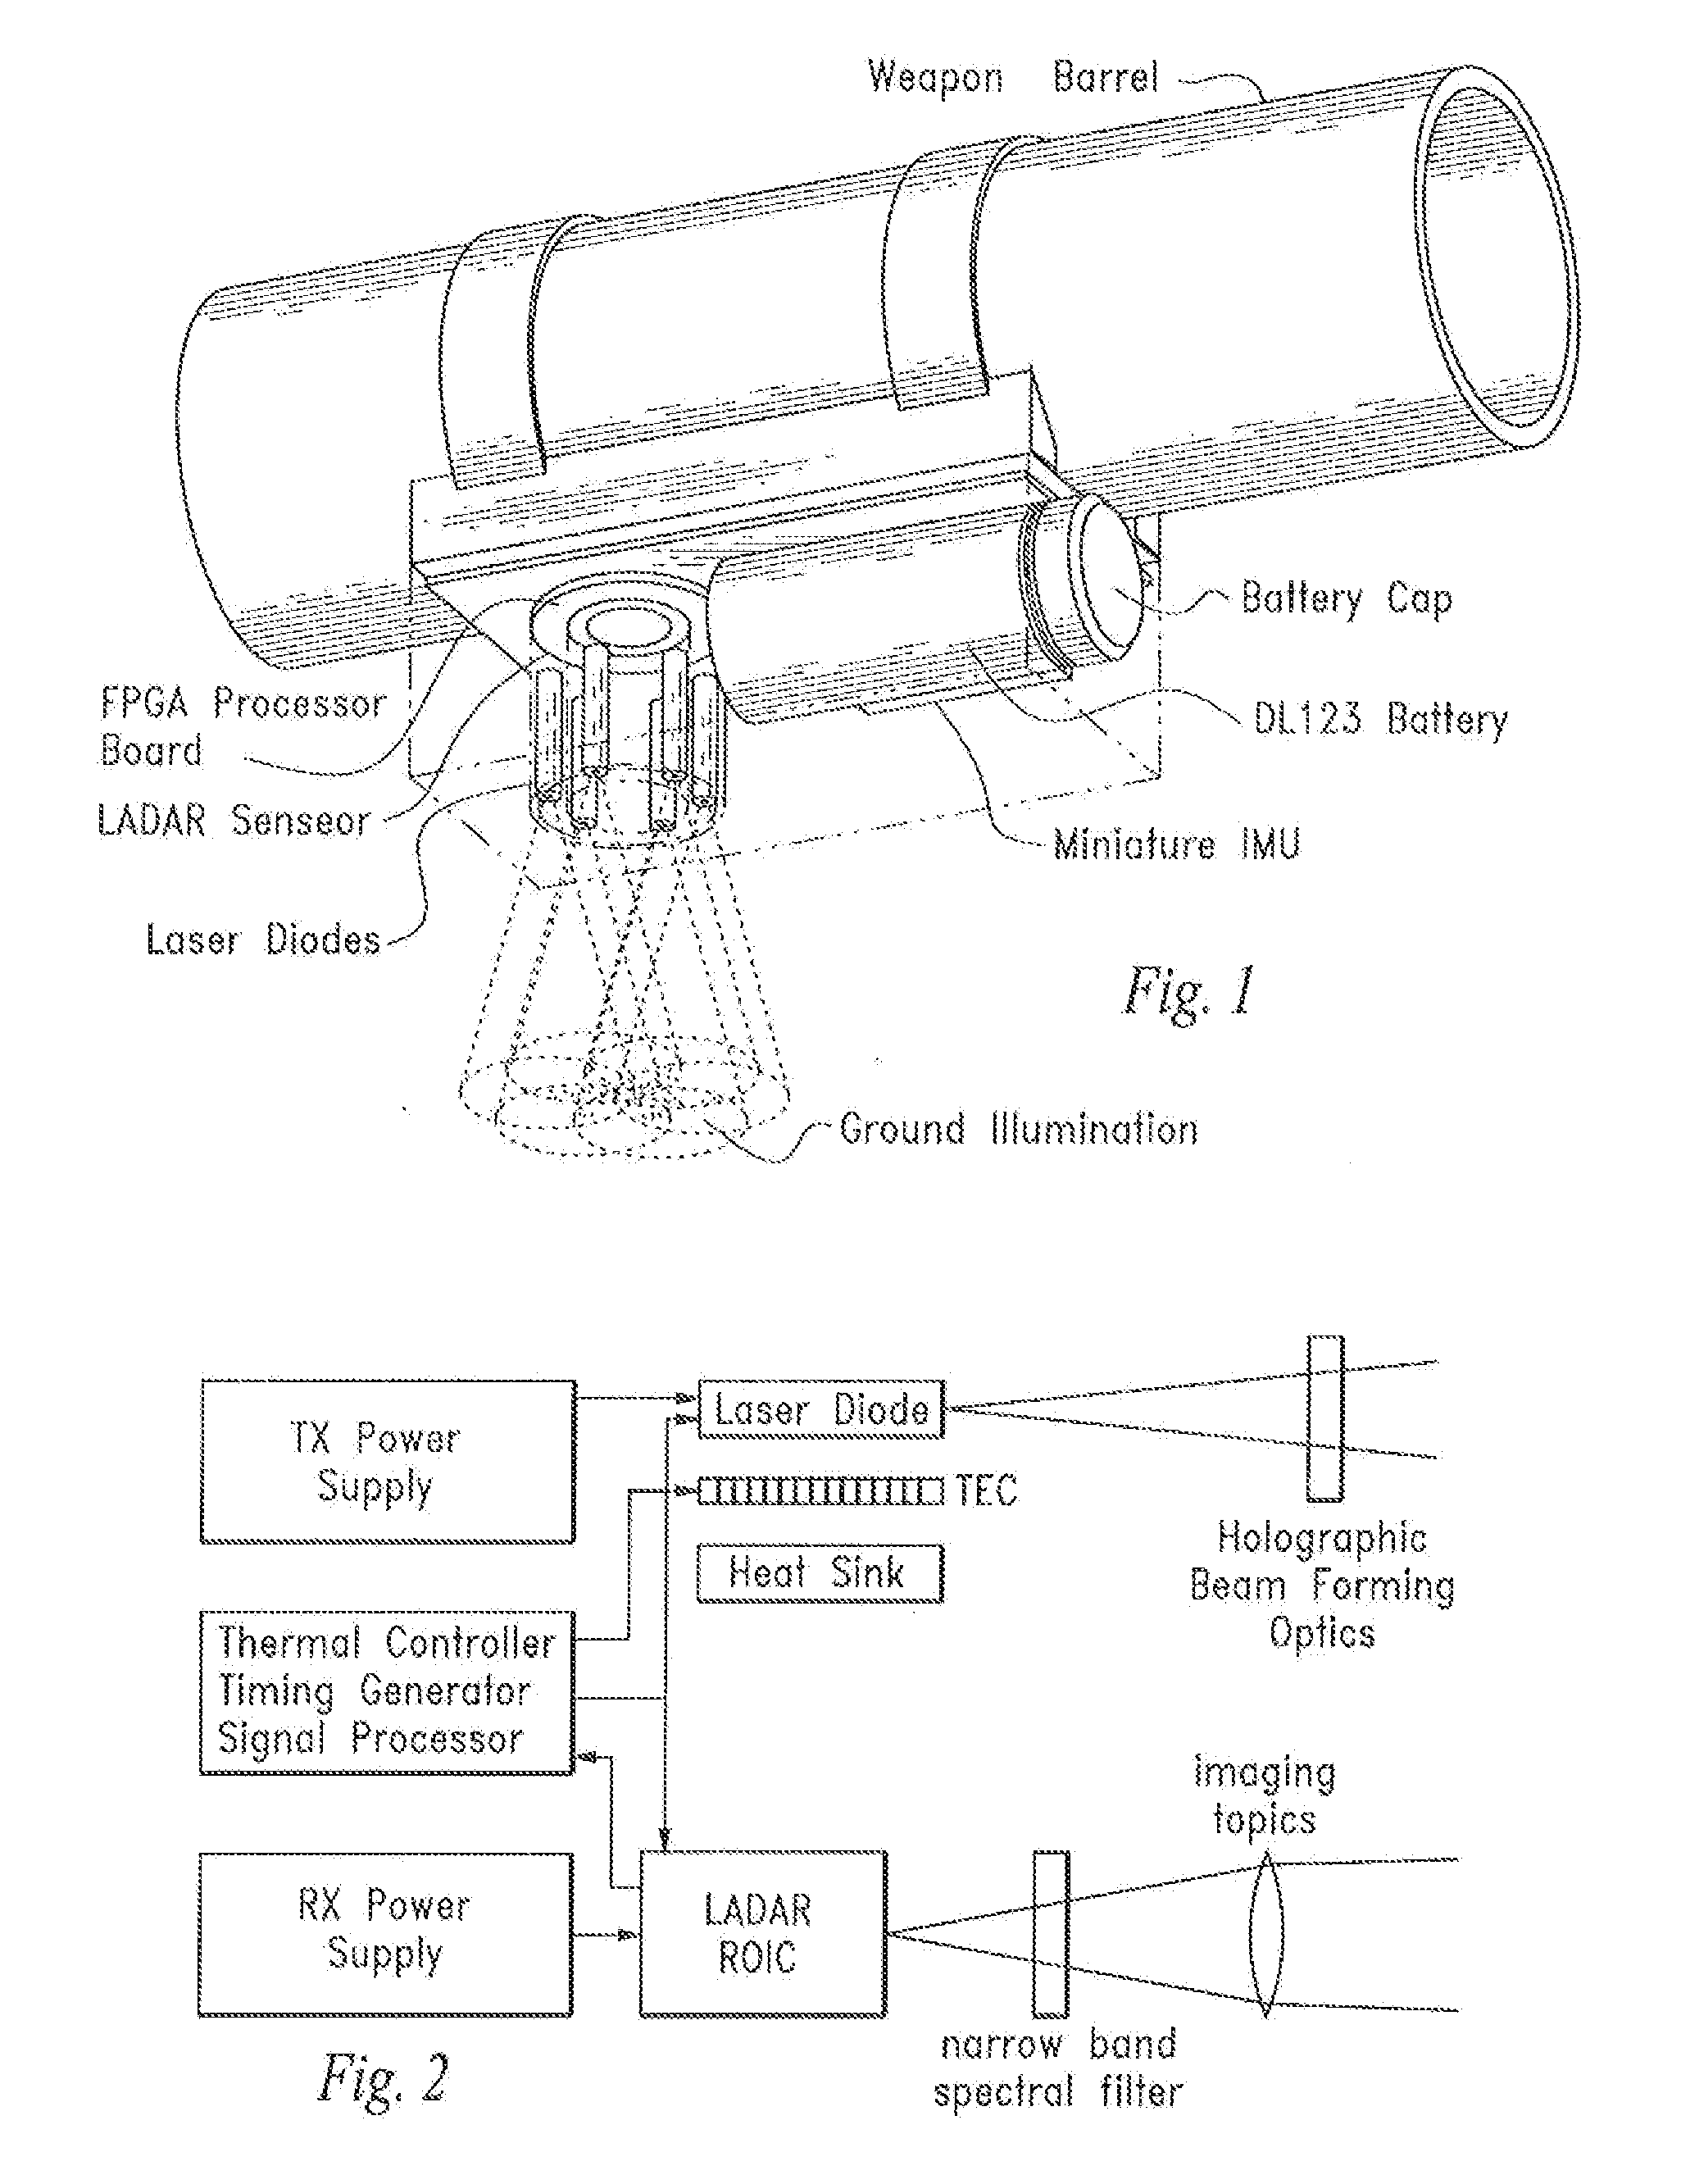 Local Alignment and Positioning Device and Method